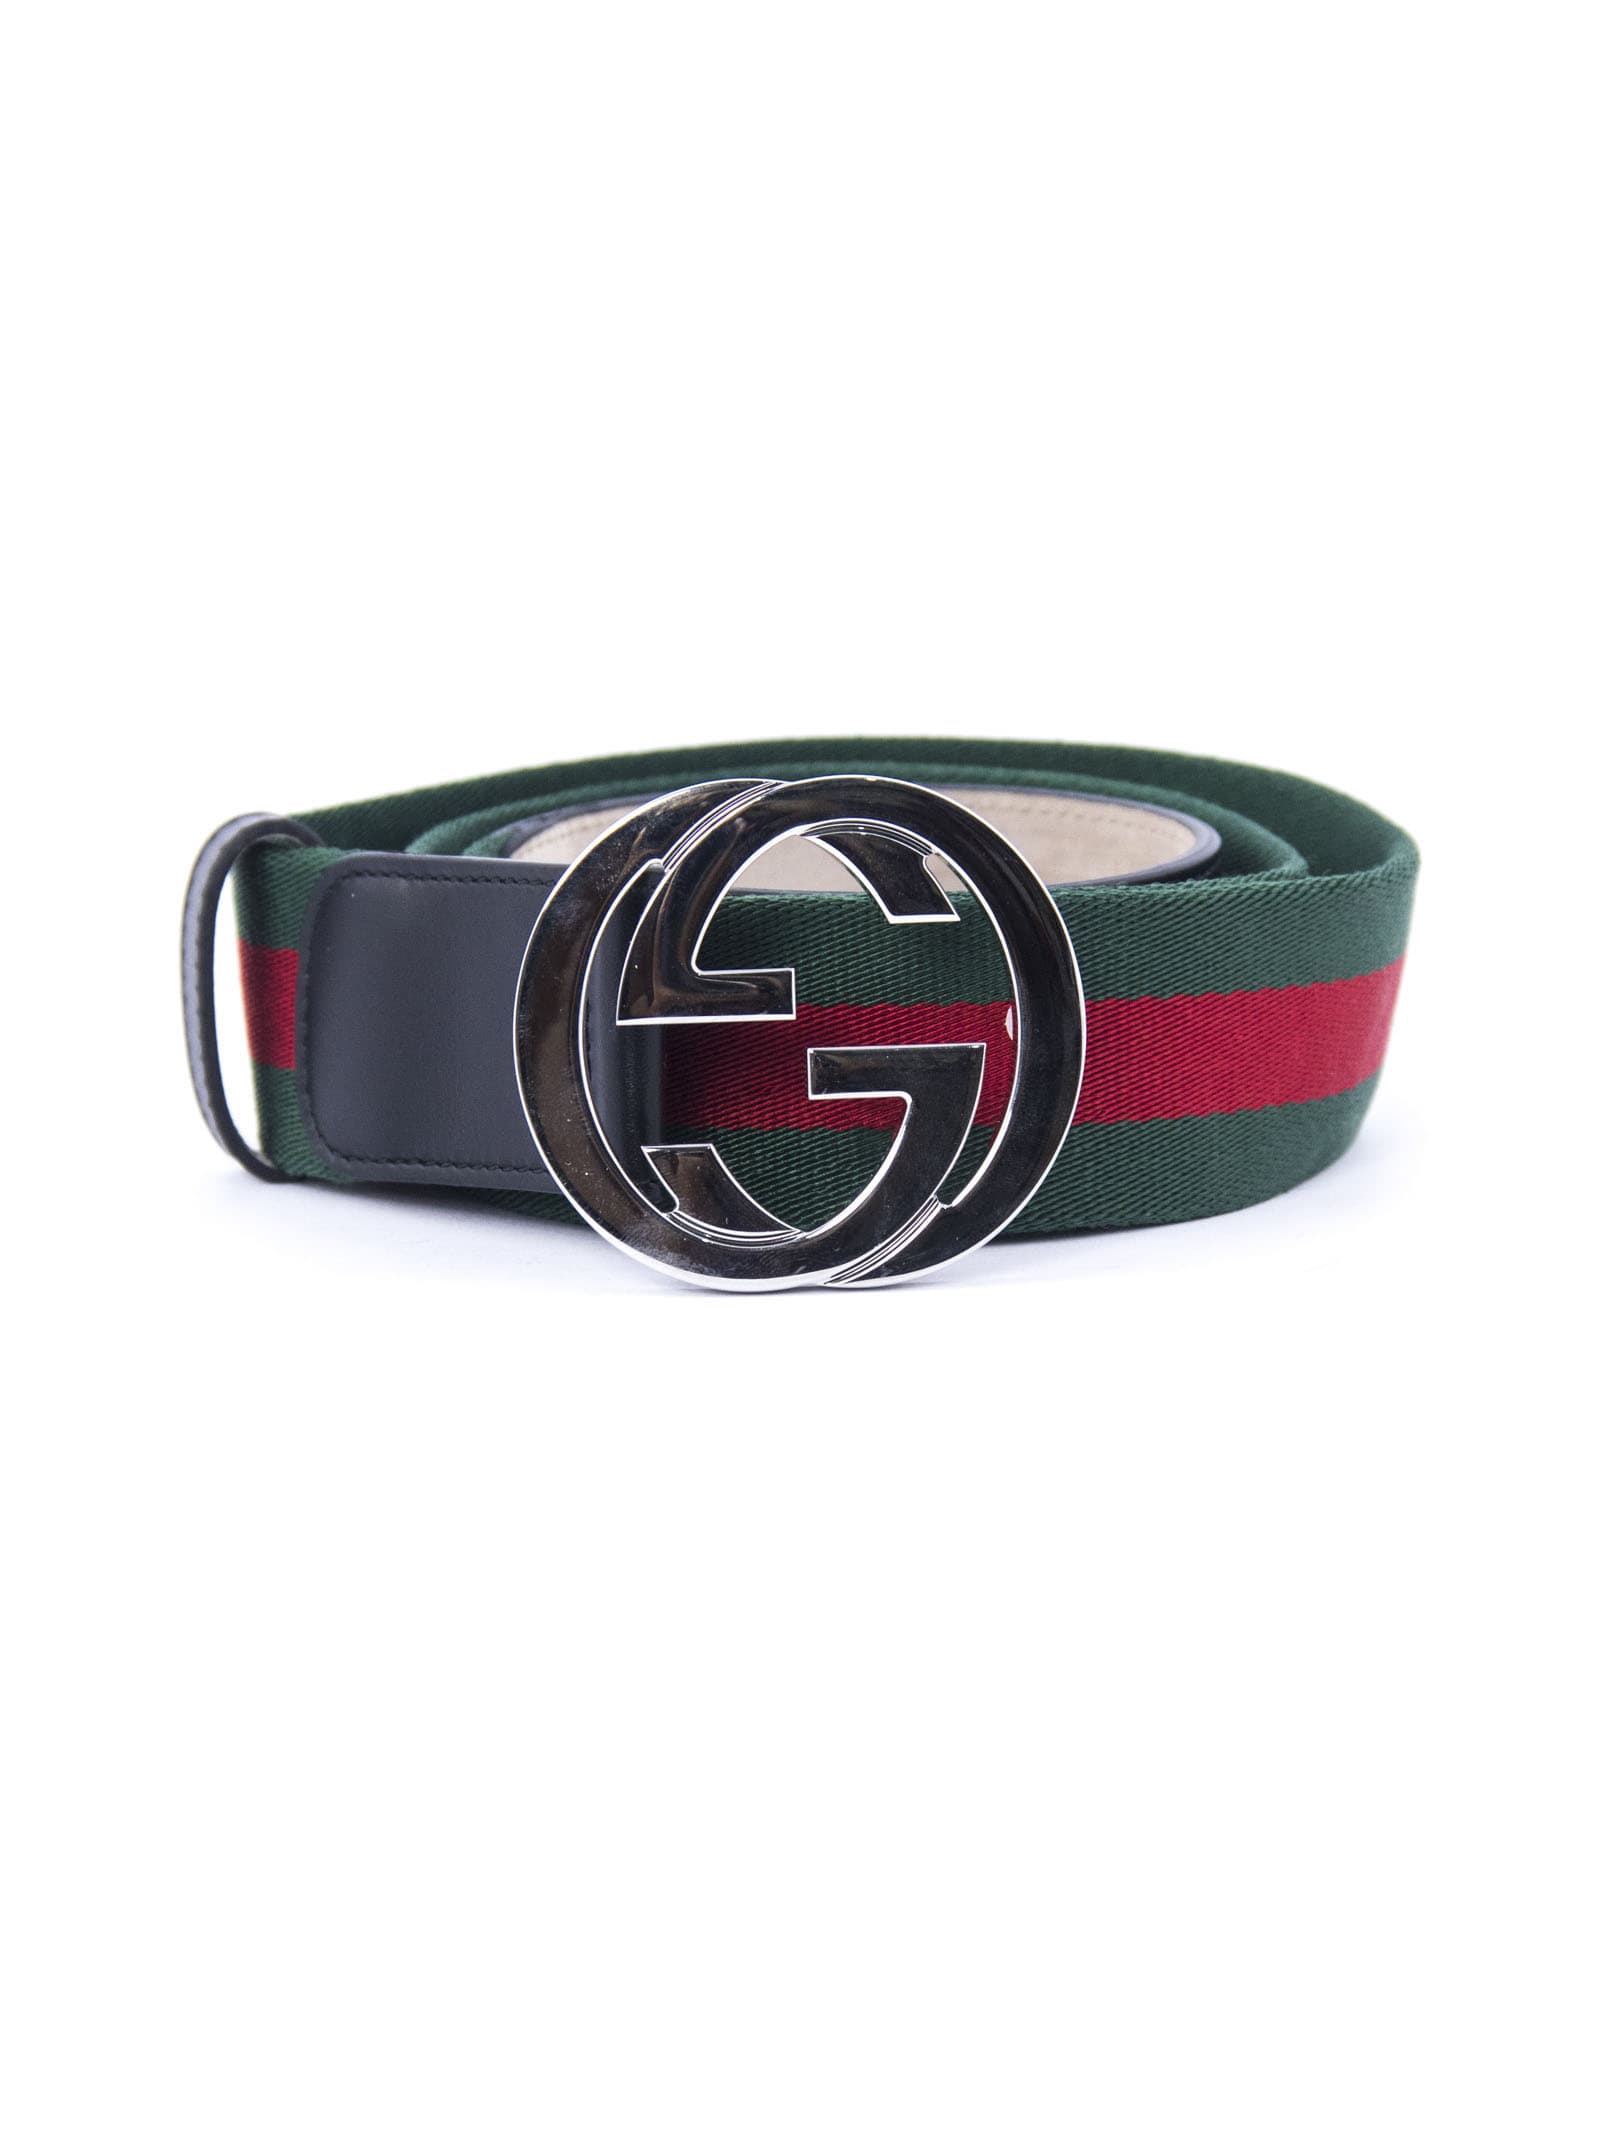 Lake Taupo Dangle Juster Gucci Web Belt With G Buckle In Rosso+verde | ModeSens